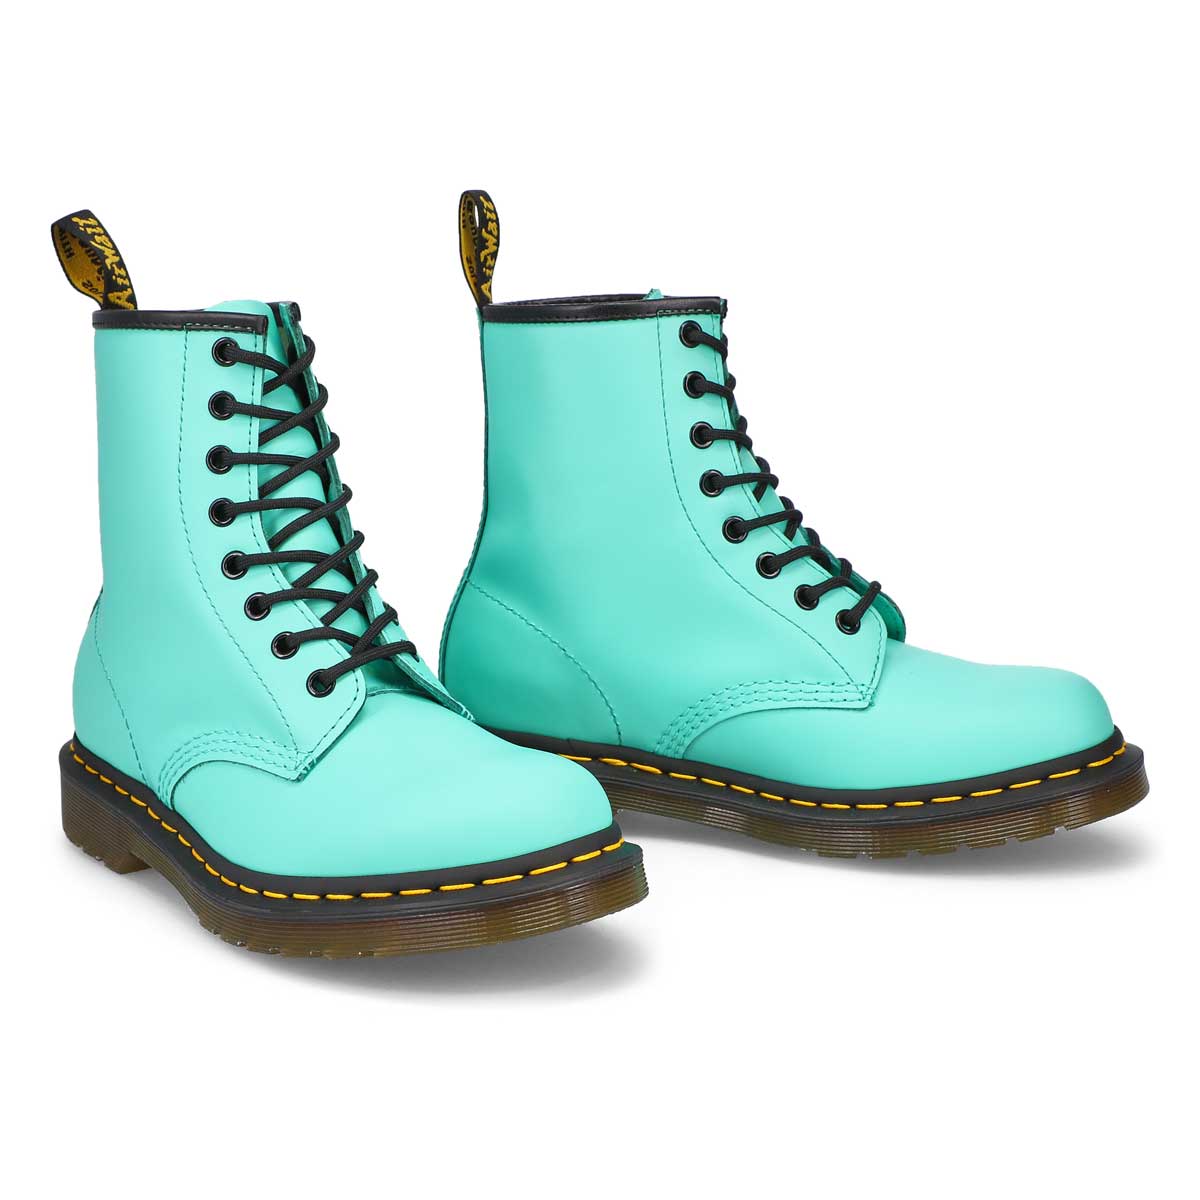 Dr Martens Women's 1460 8-Eye Smooth Leather | SoftMoc.com